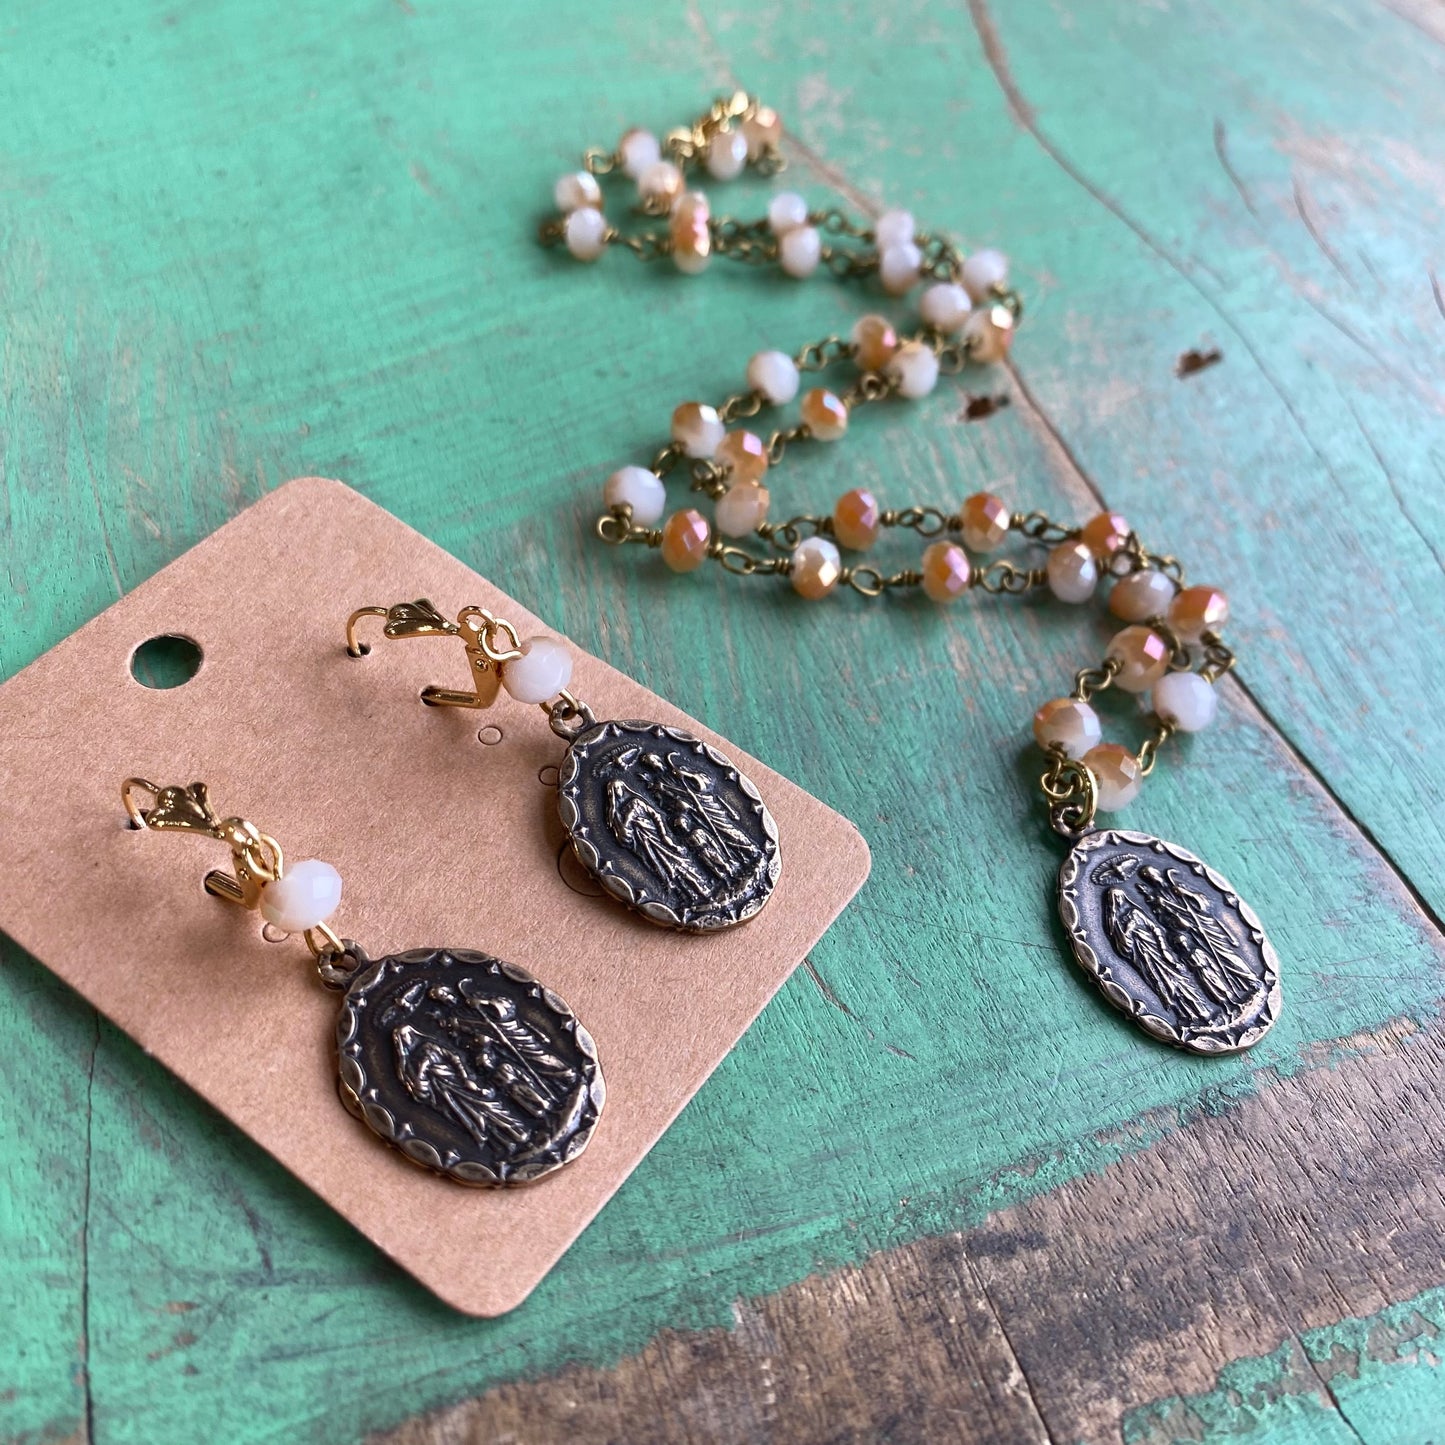 Nazareth Necklace and Earrings